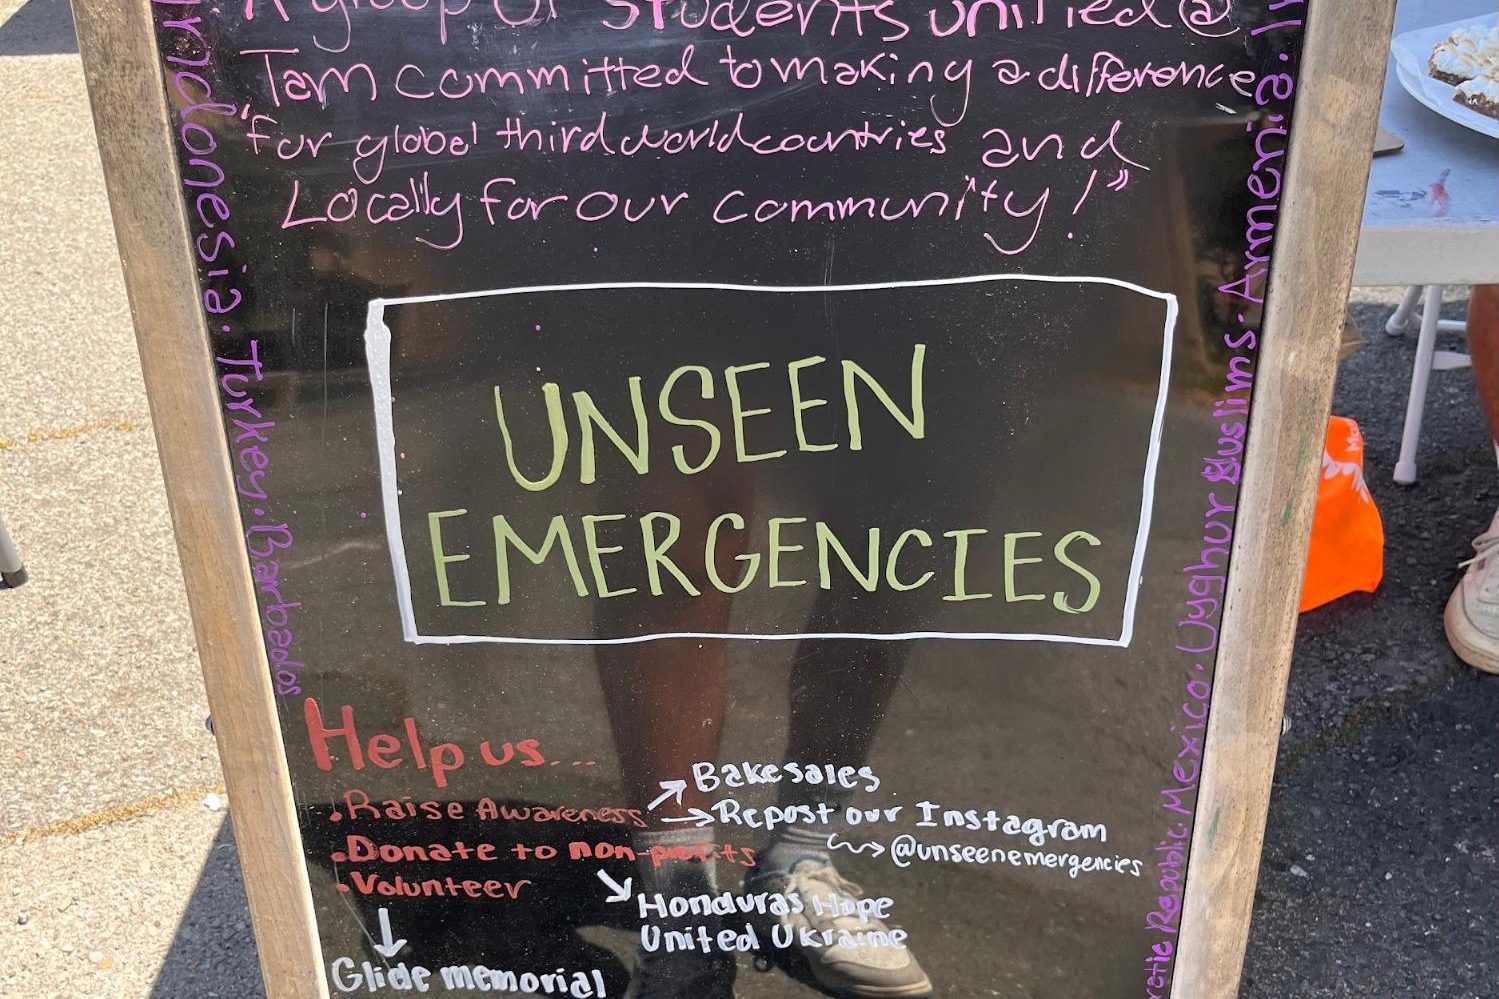 Unseen Emergencies, a club at Tamalpais High School that spreads awareness of global political issues, set up a booth and sign at Diversity Day.